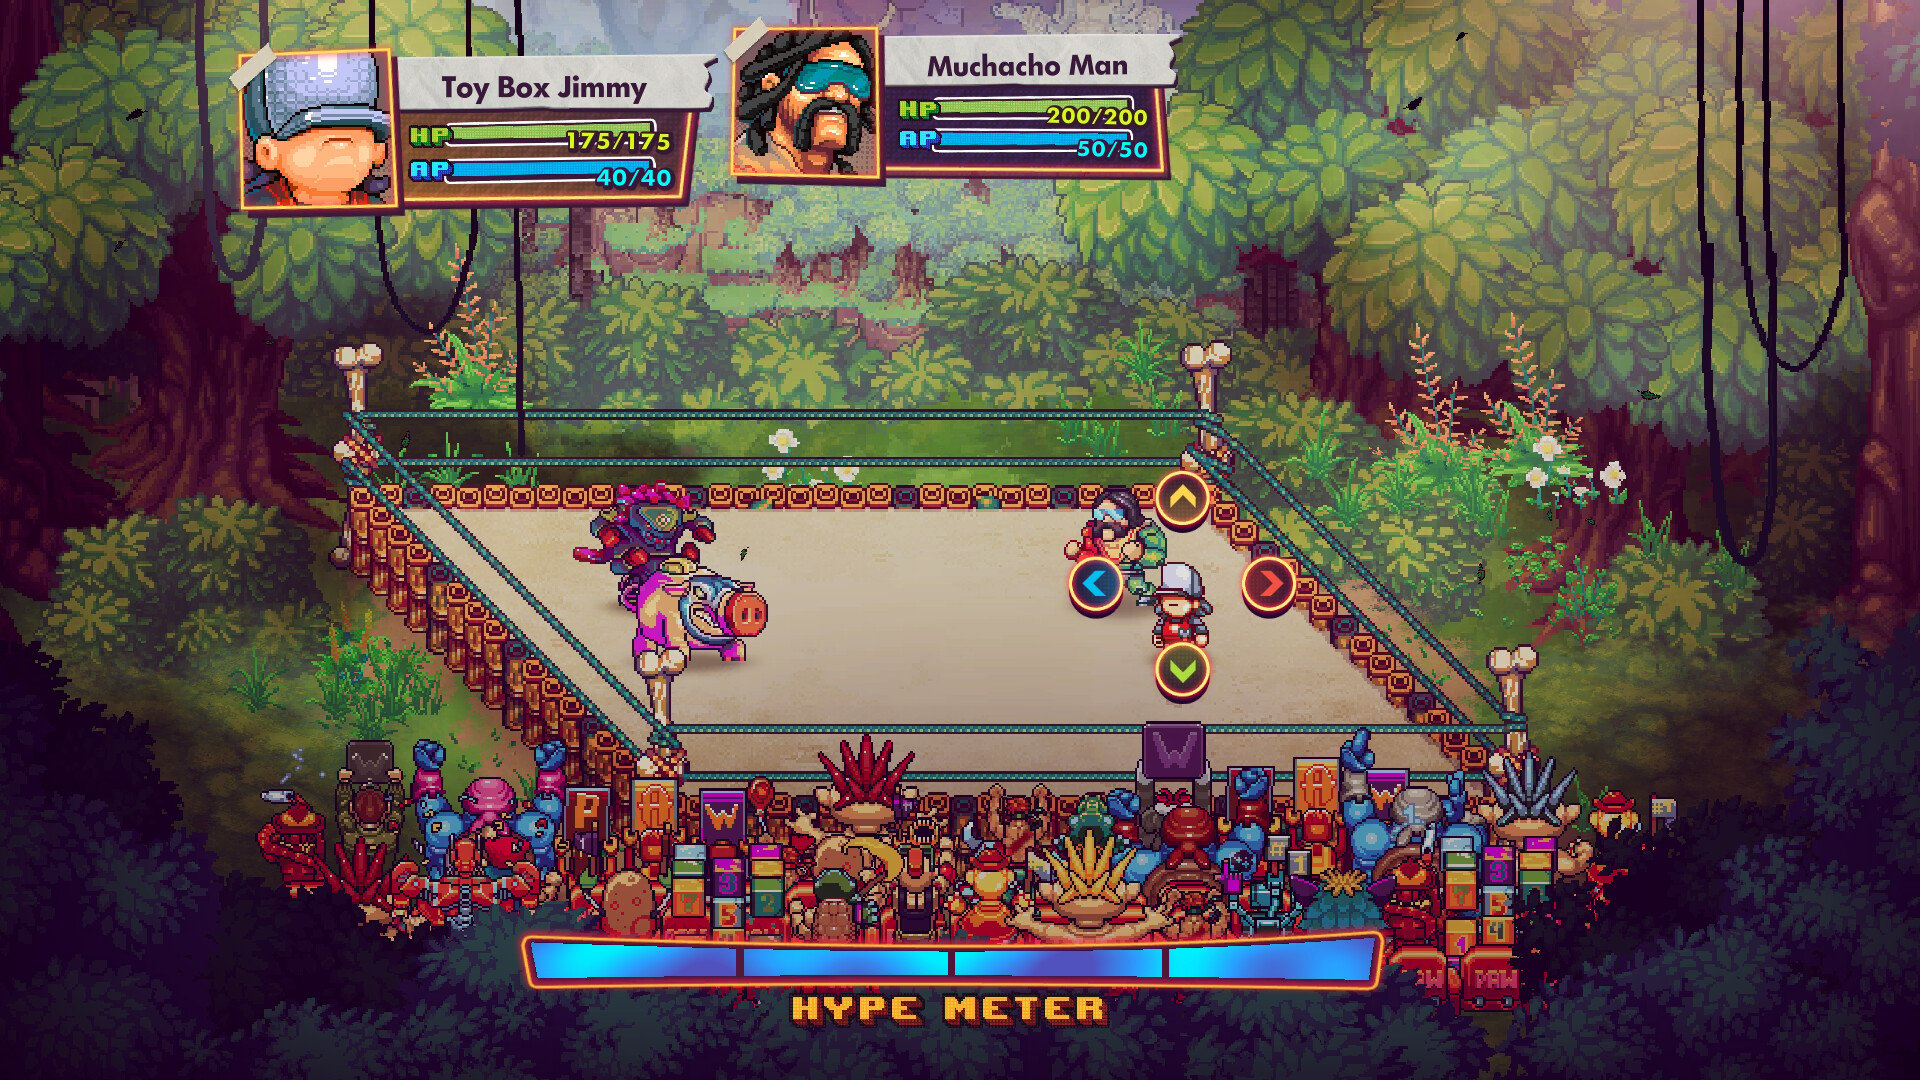 WrestleQuest pro wrestling RPG delayed two weeks by game save